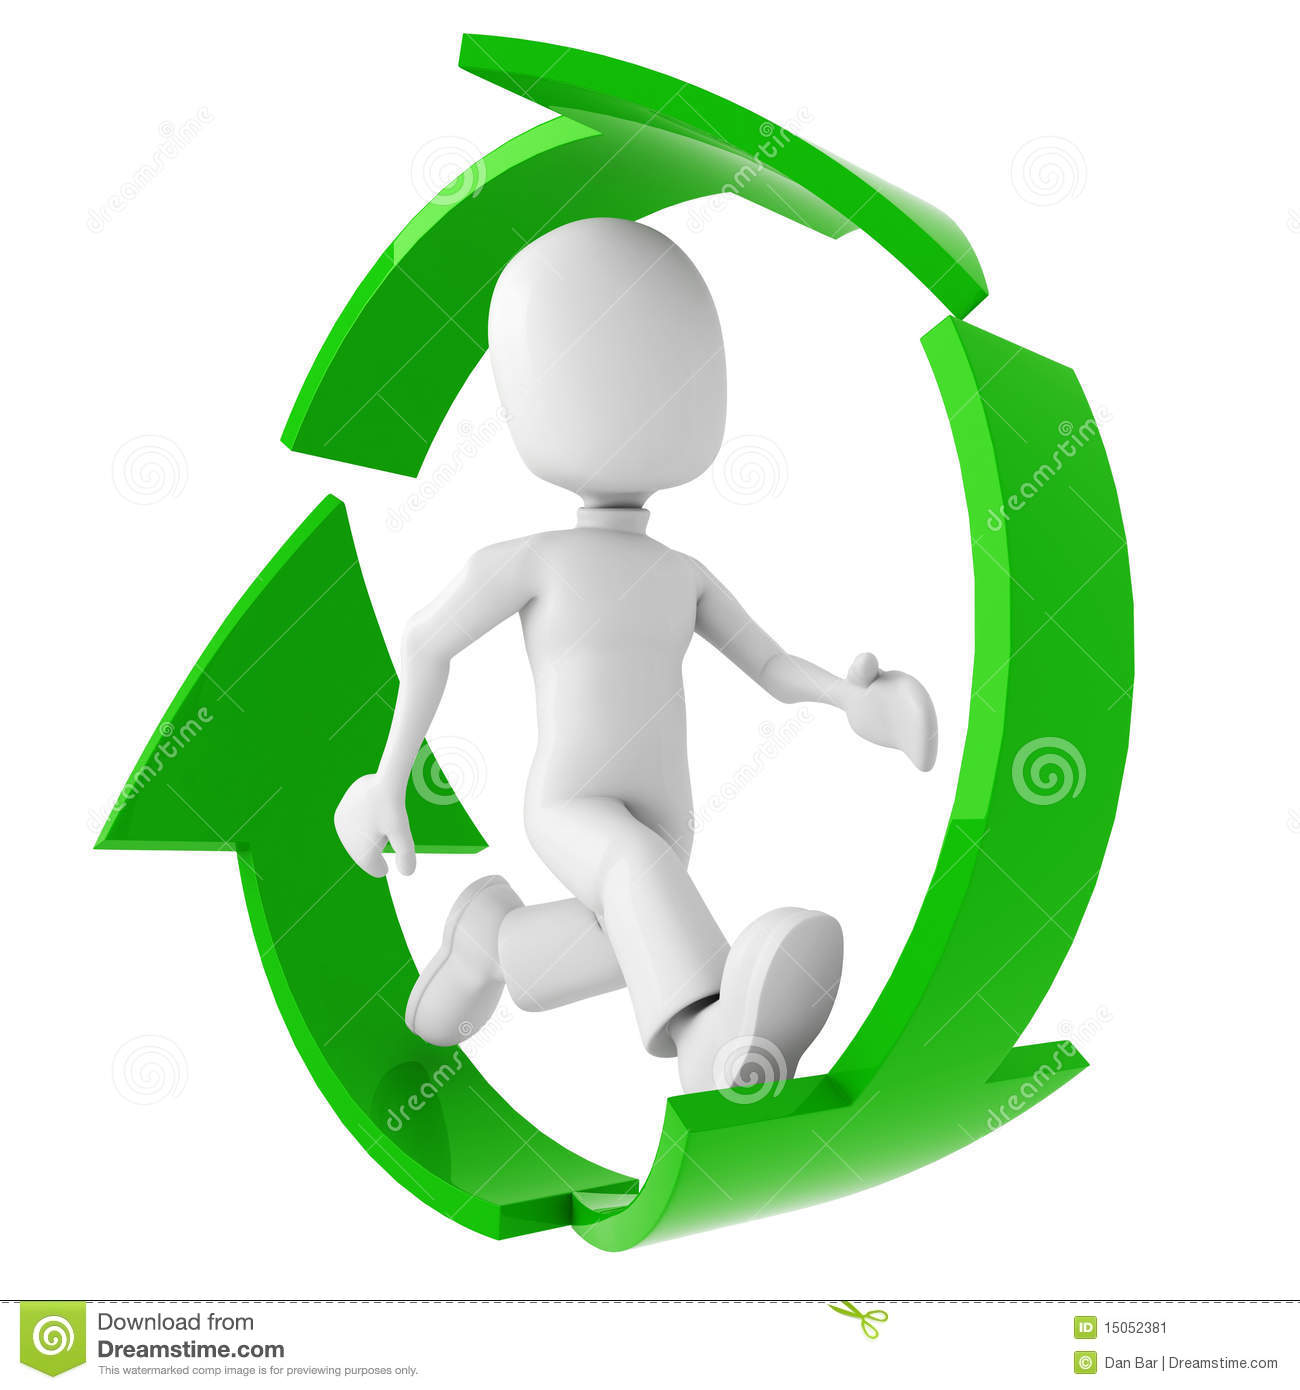 3d Man Running Inside The Recycle Symbol Stock Image   Image    